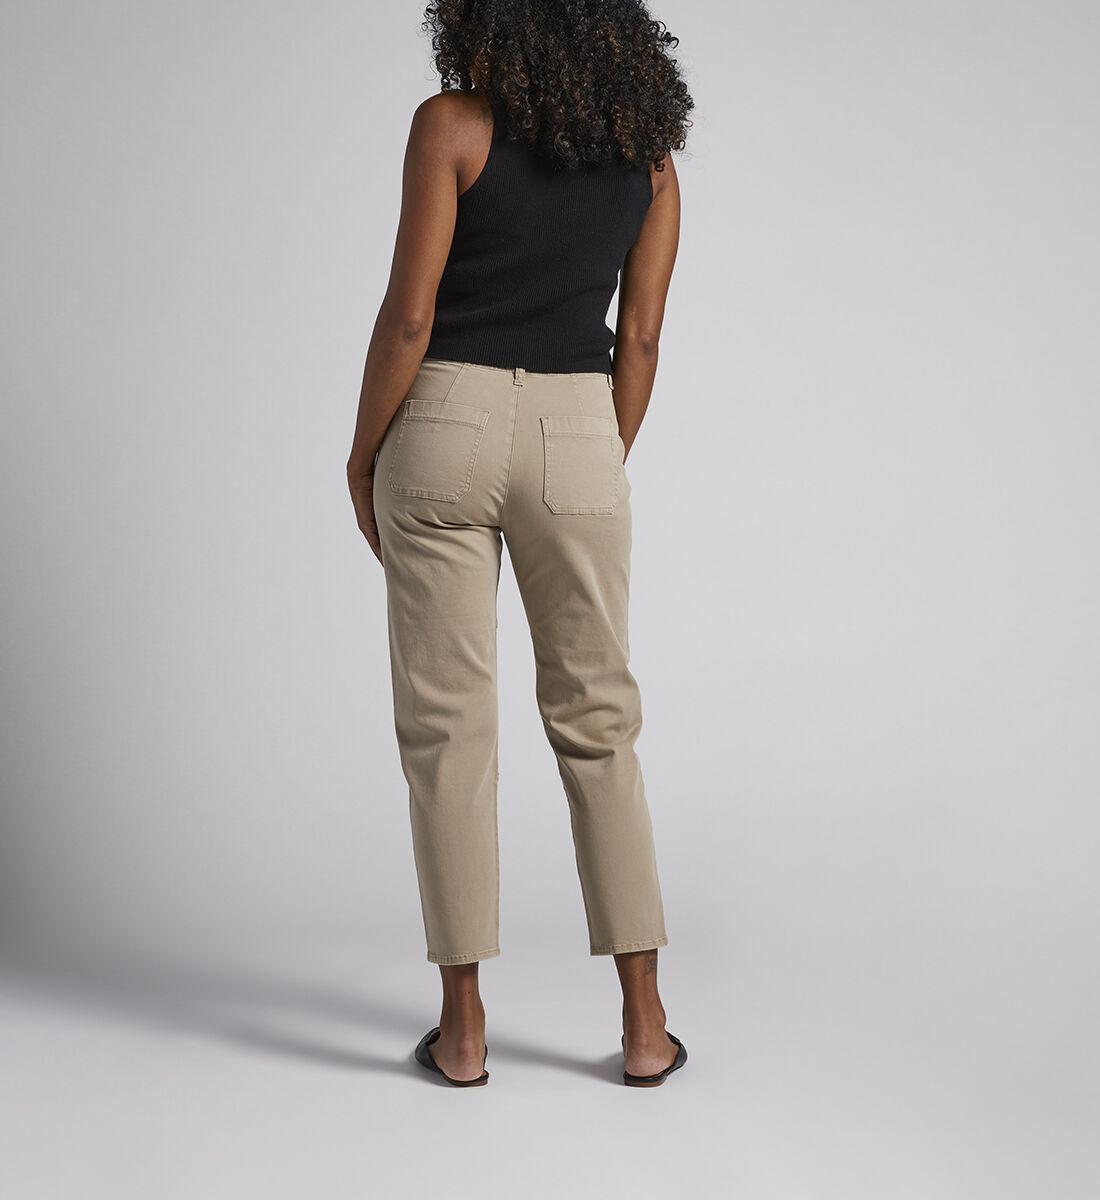 Buy Utility High Rise Tapered Ankle Pants for USD 44.00 | Jag 